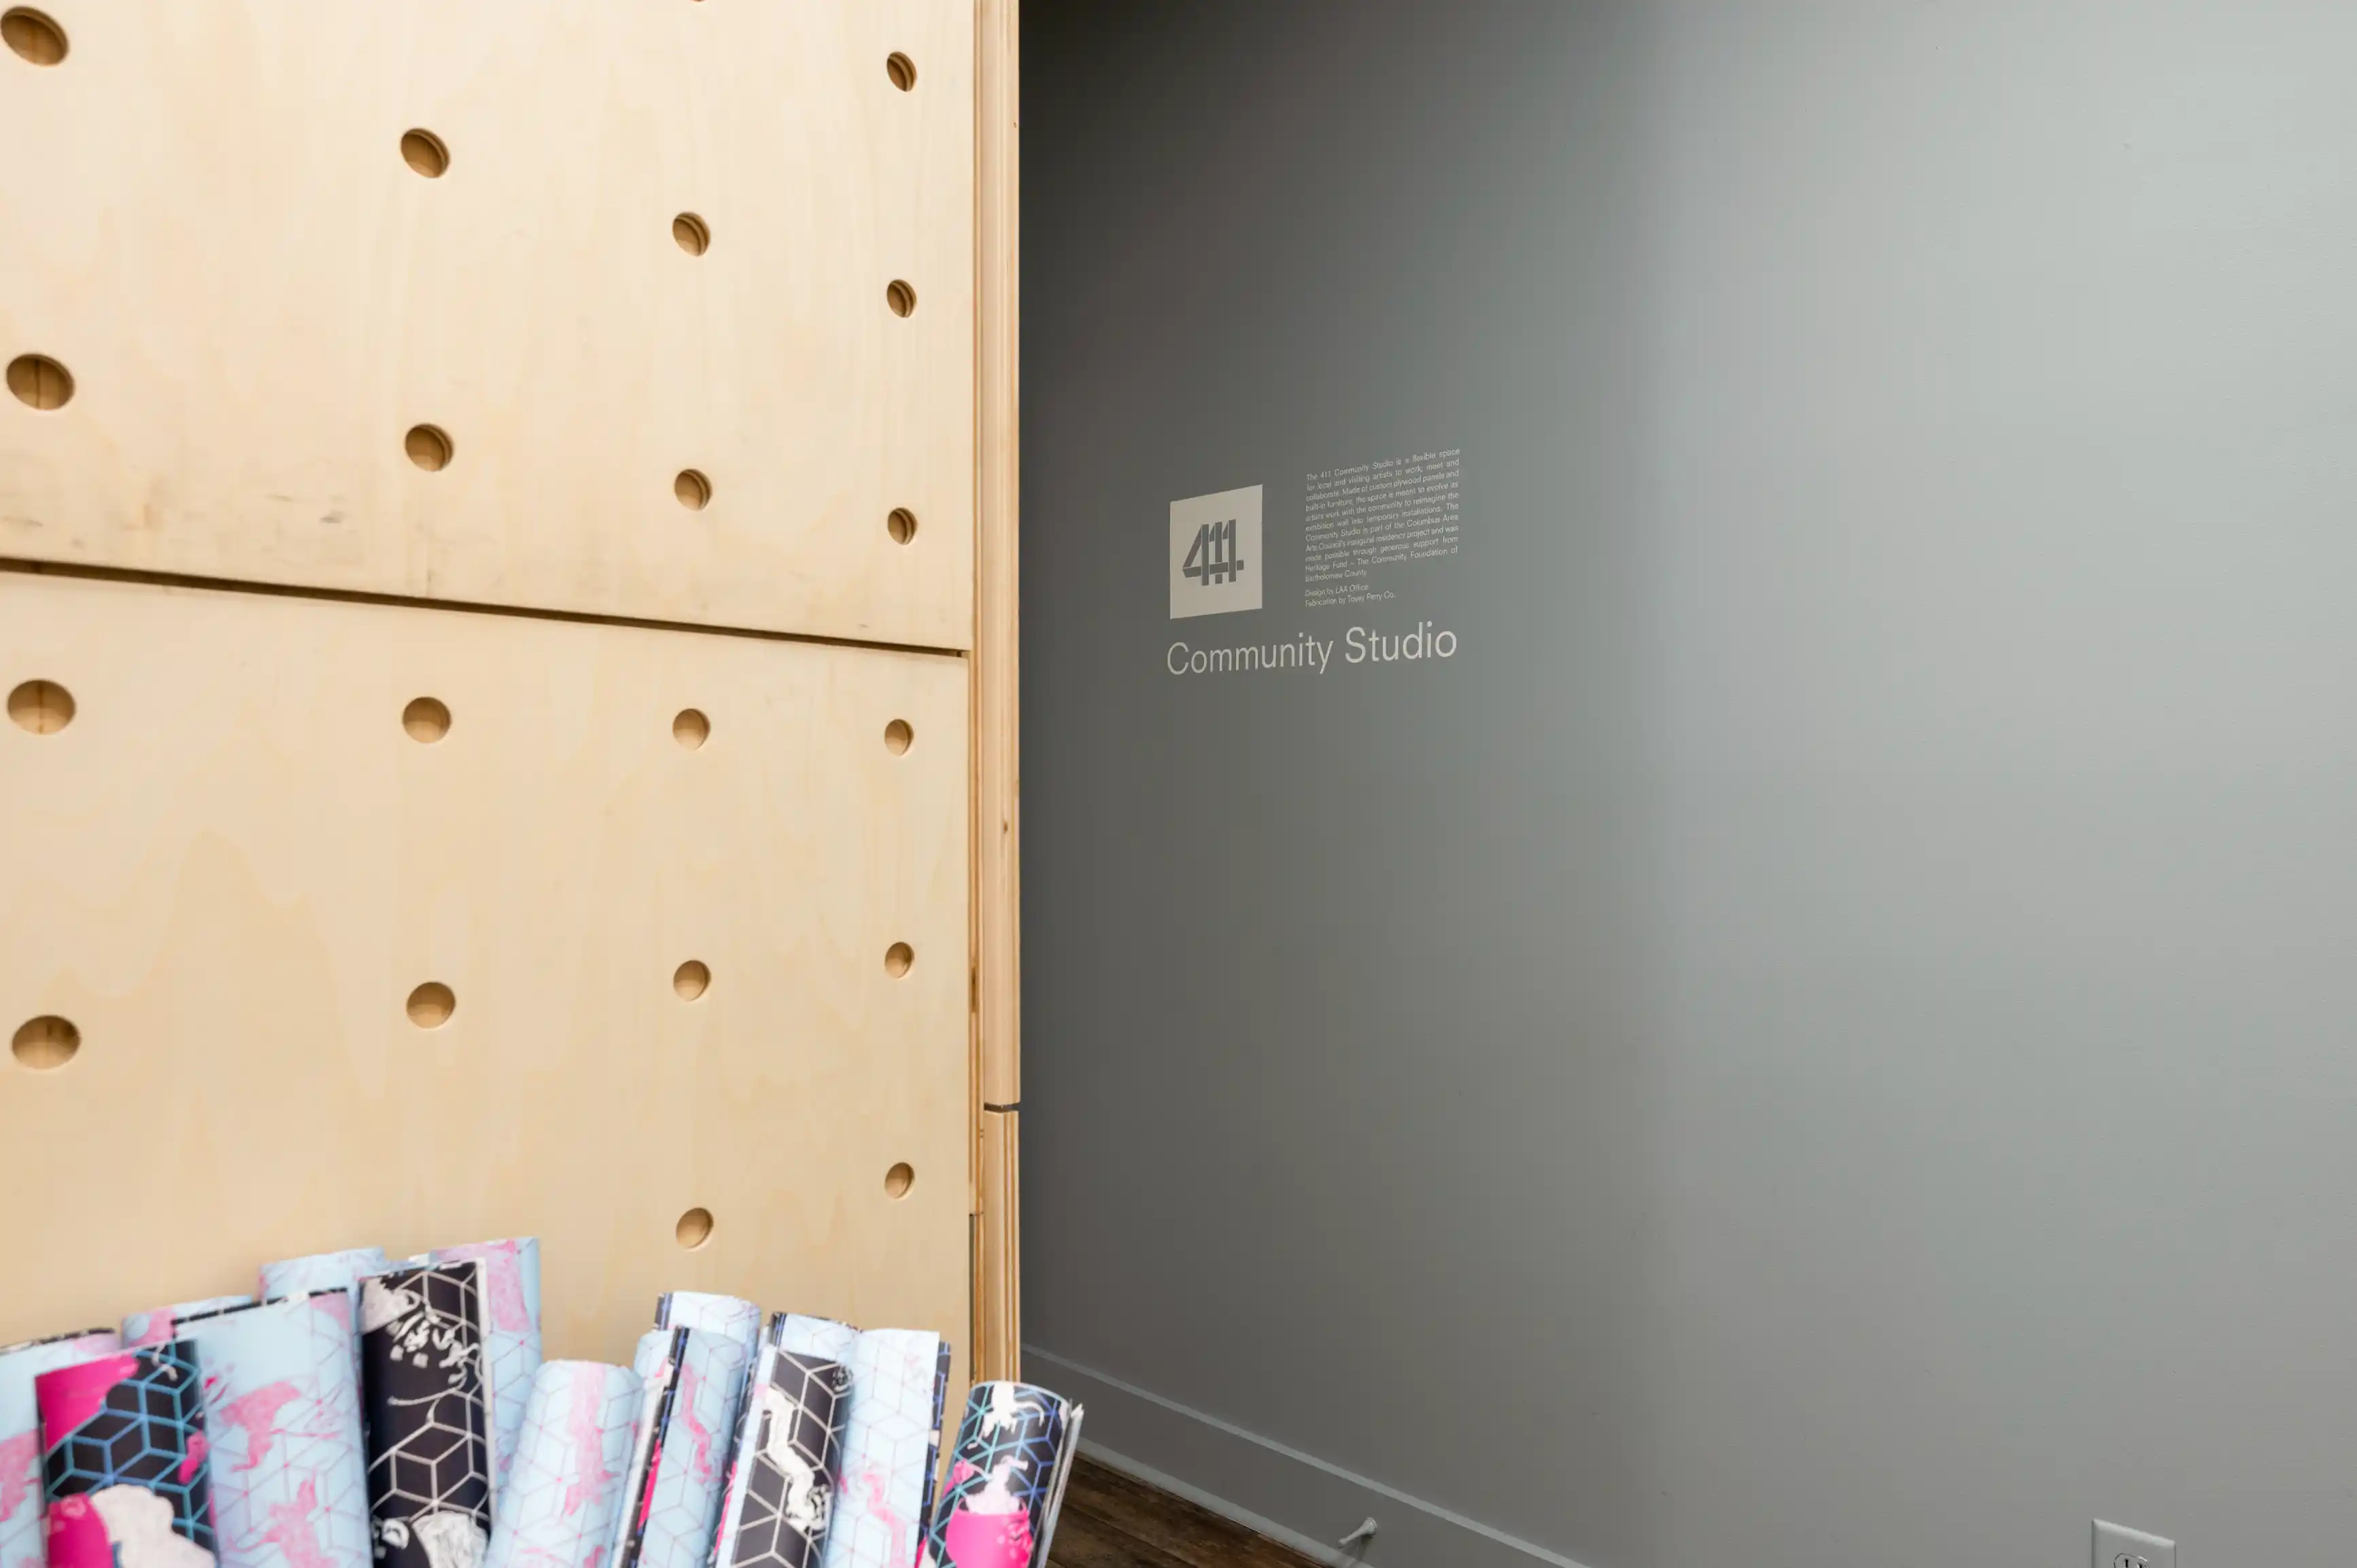 Corner of a modern room with a wooden panel with circular holes on the left and a wall with text and a sign reading "Community Studio" on the right, with a stack of colorful rolled yoga mats in the foreground.